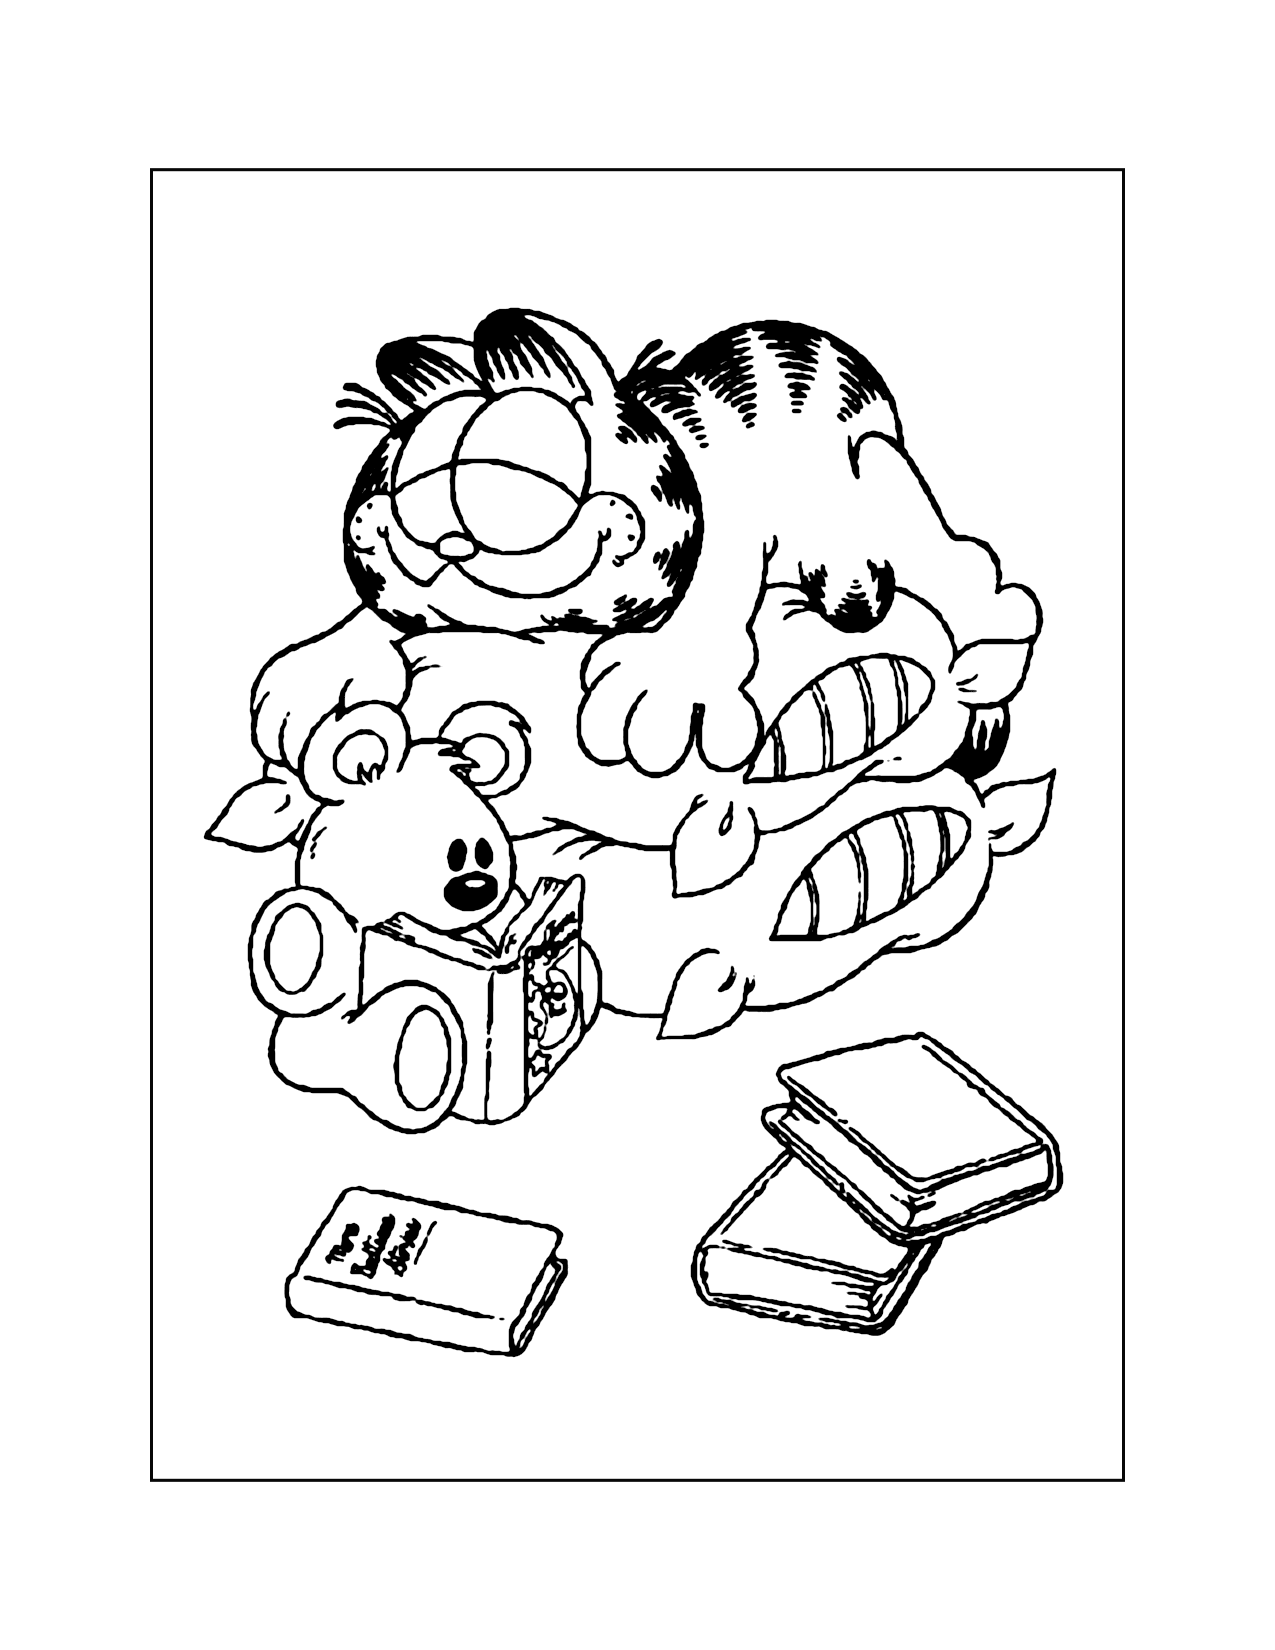 Cozy Garfield And Pooky Coloring Page